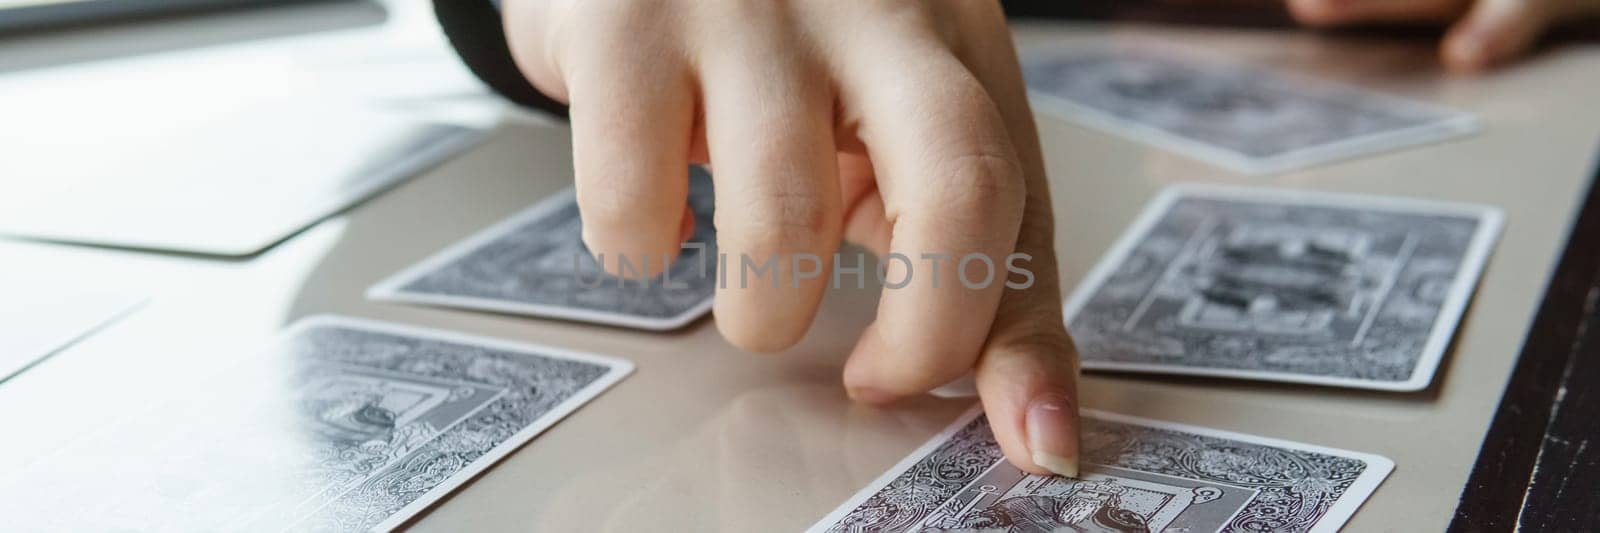 TVER, RUSSIA - FEBRUARY 11, 2023. Tarot cards, Tarot card divination, esoteric background. A woman makes a layout on the cards at the table. Divination, predictions on tarot cards